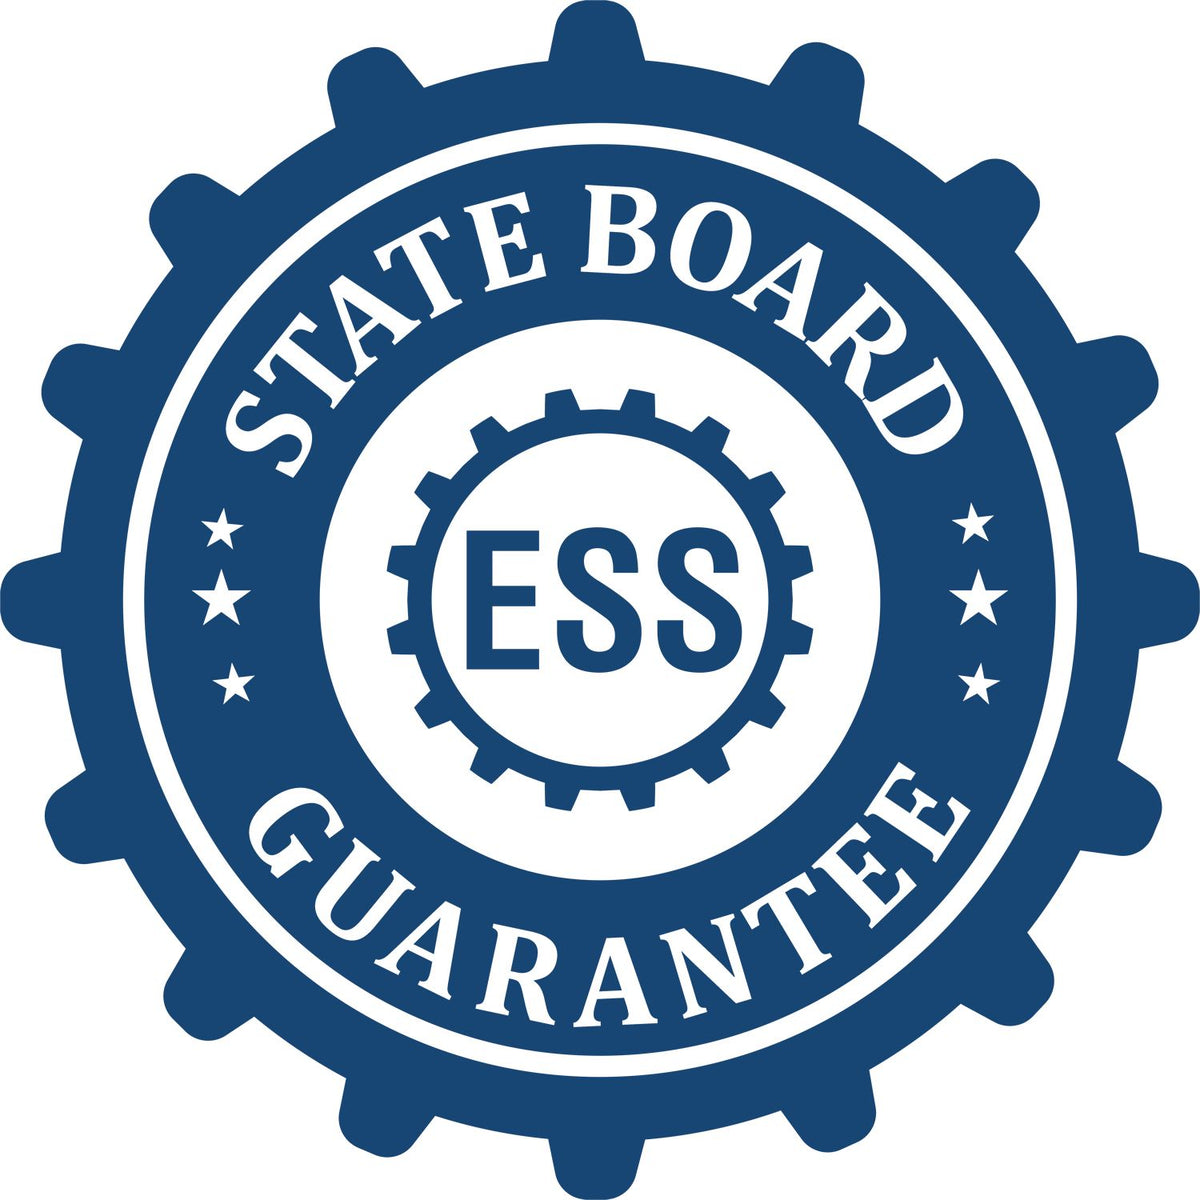 An emblem in a gear shape illustrating a state board guarantee for the State of Kansas Long Reach Architectural Embossing Seal product.